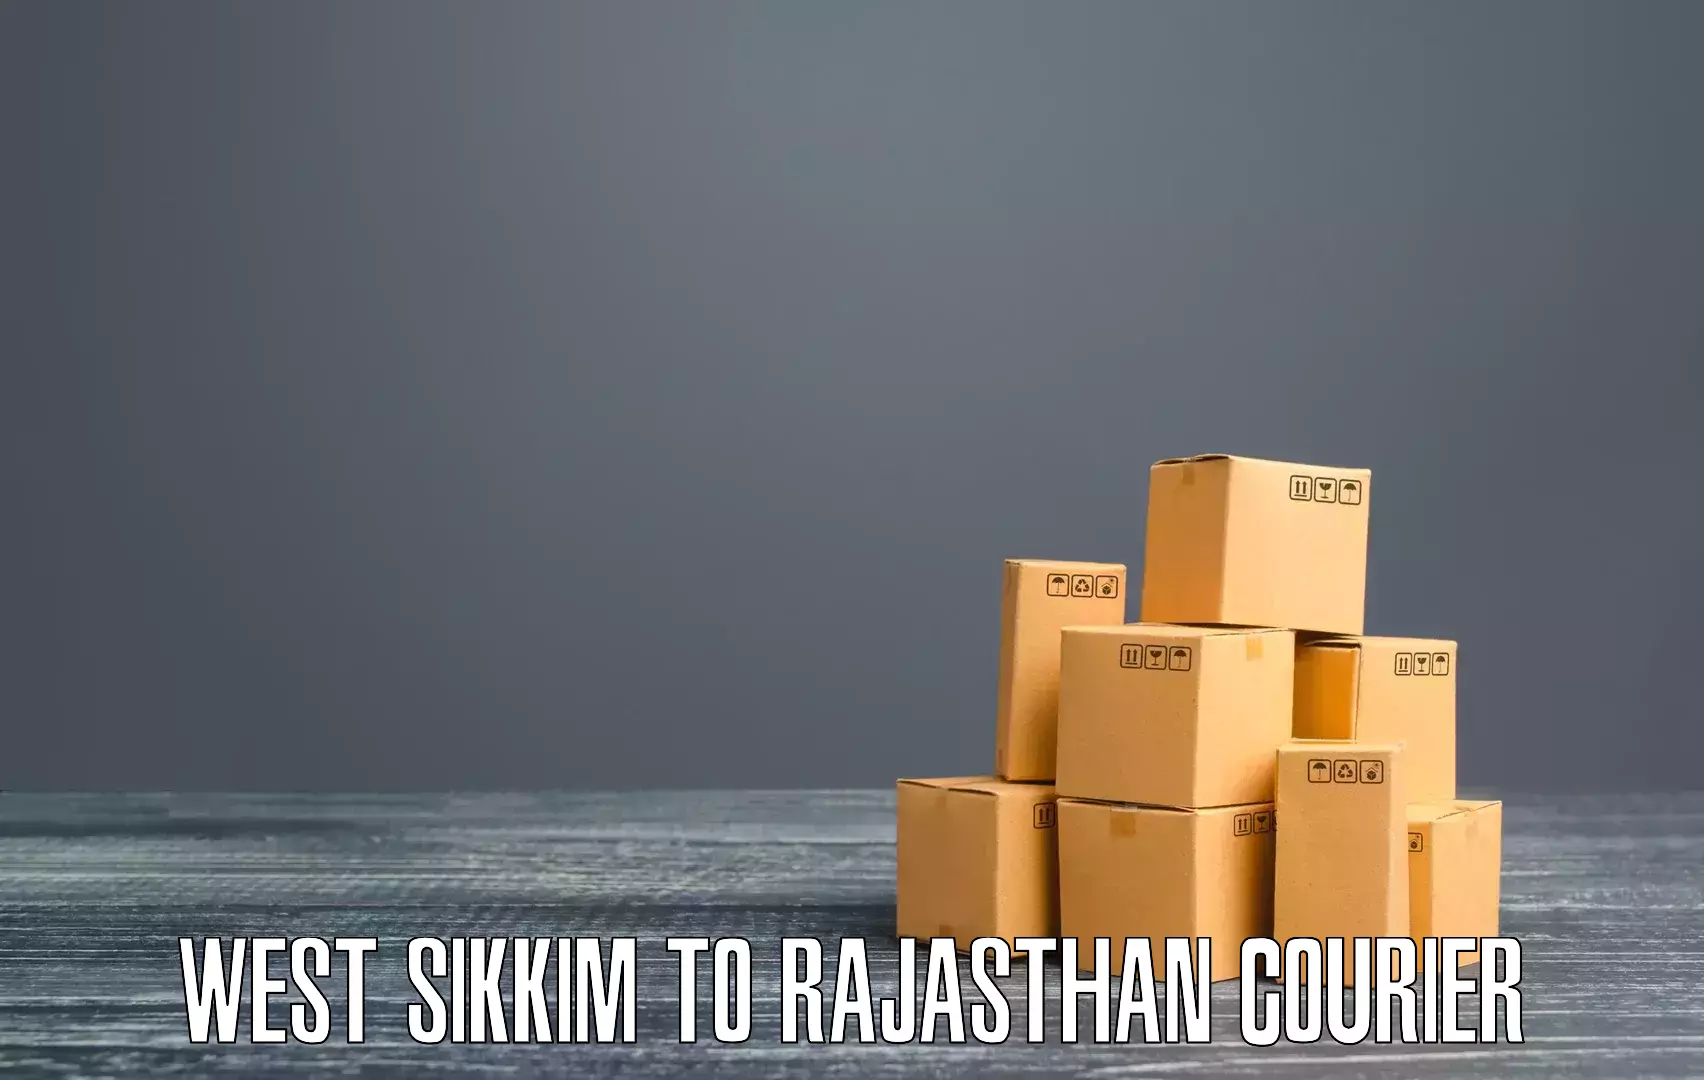 Special handling courier West Sikkim to Lalsot